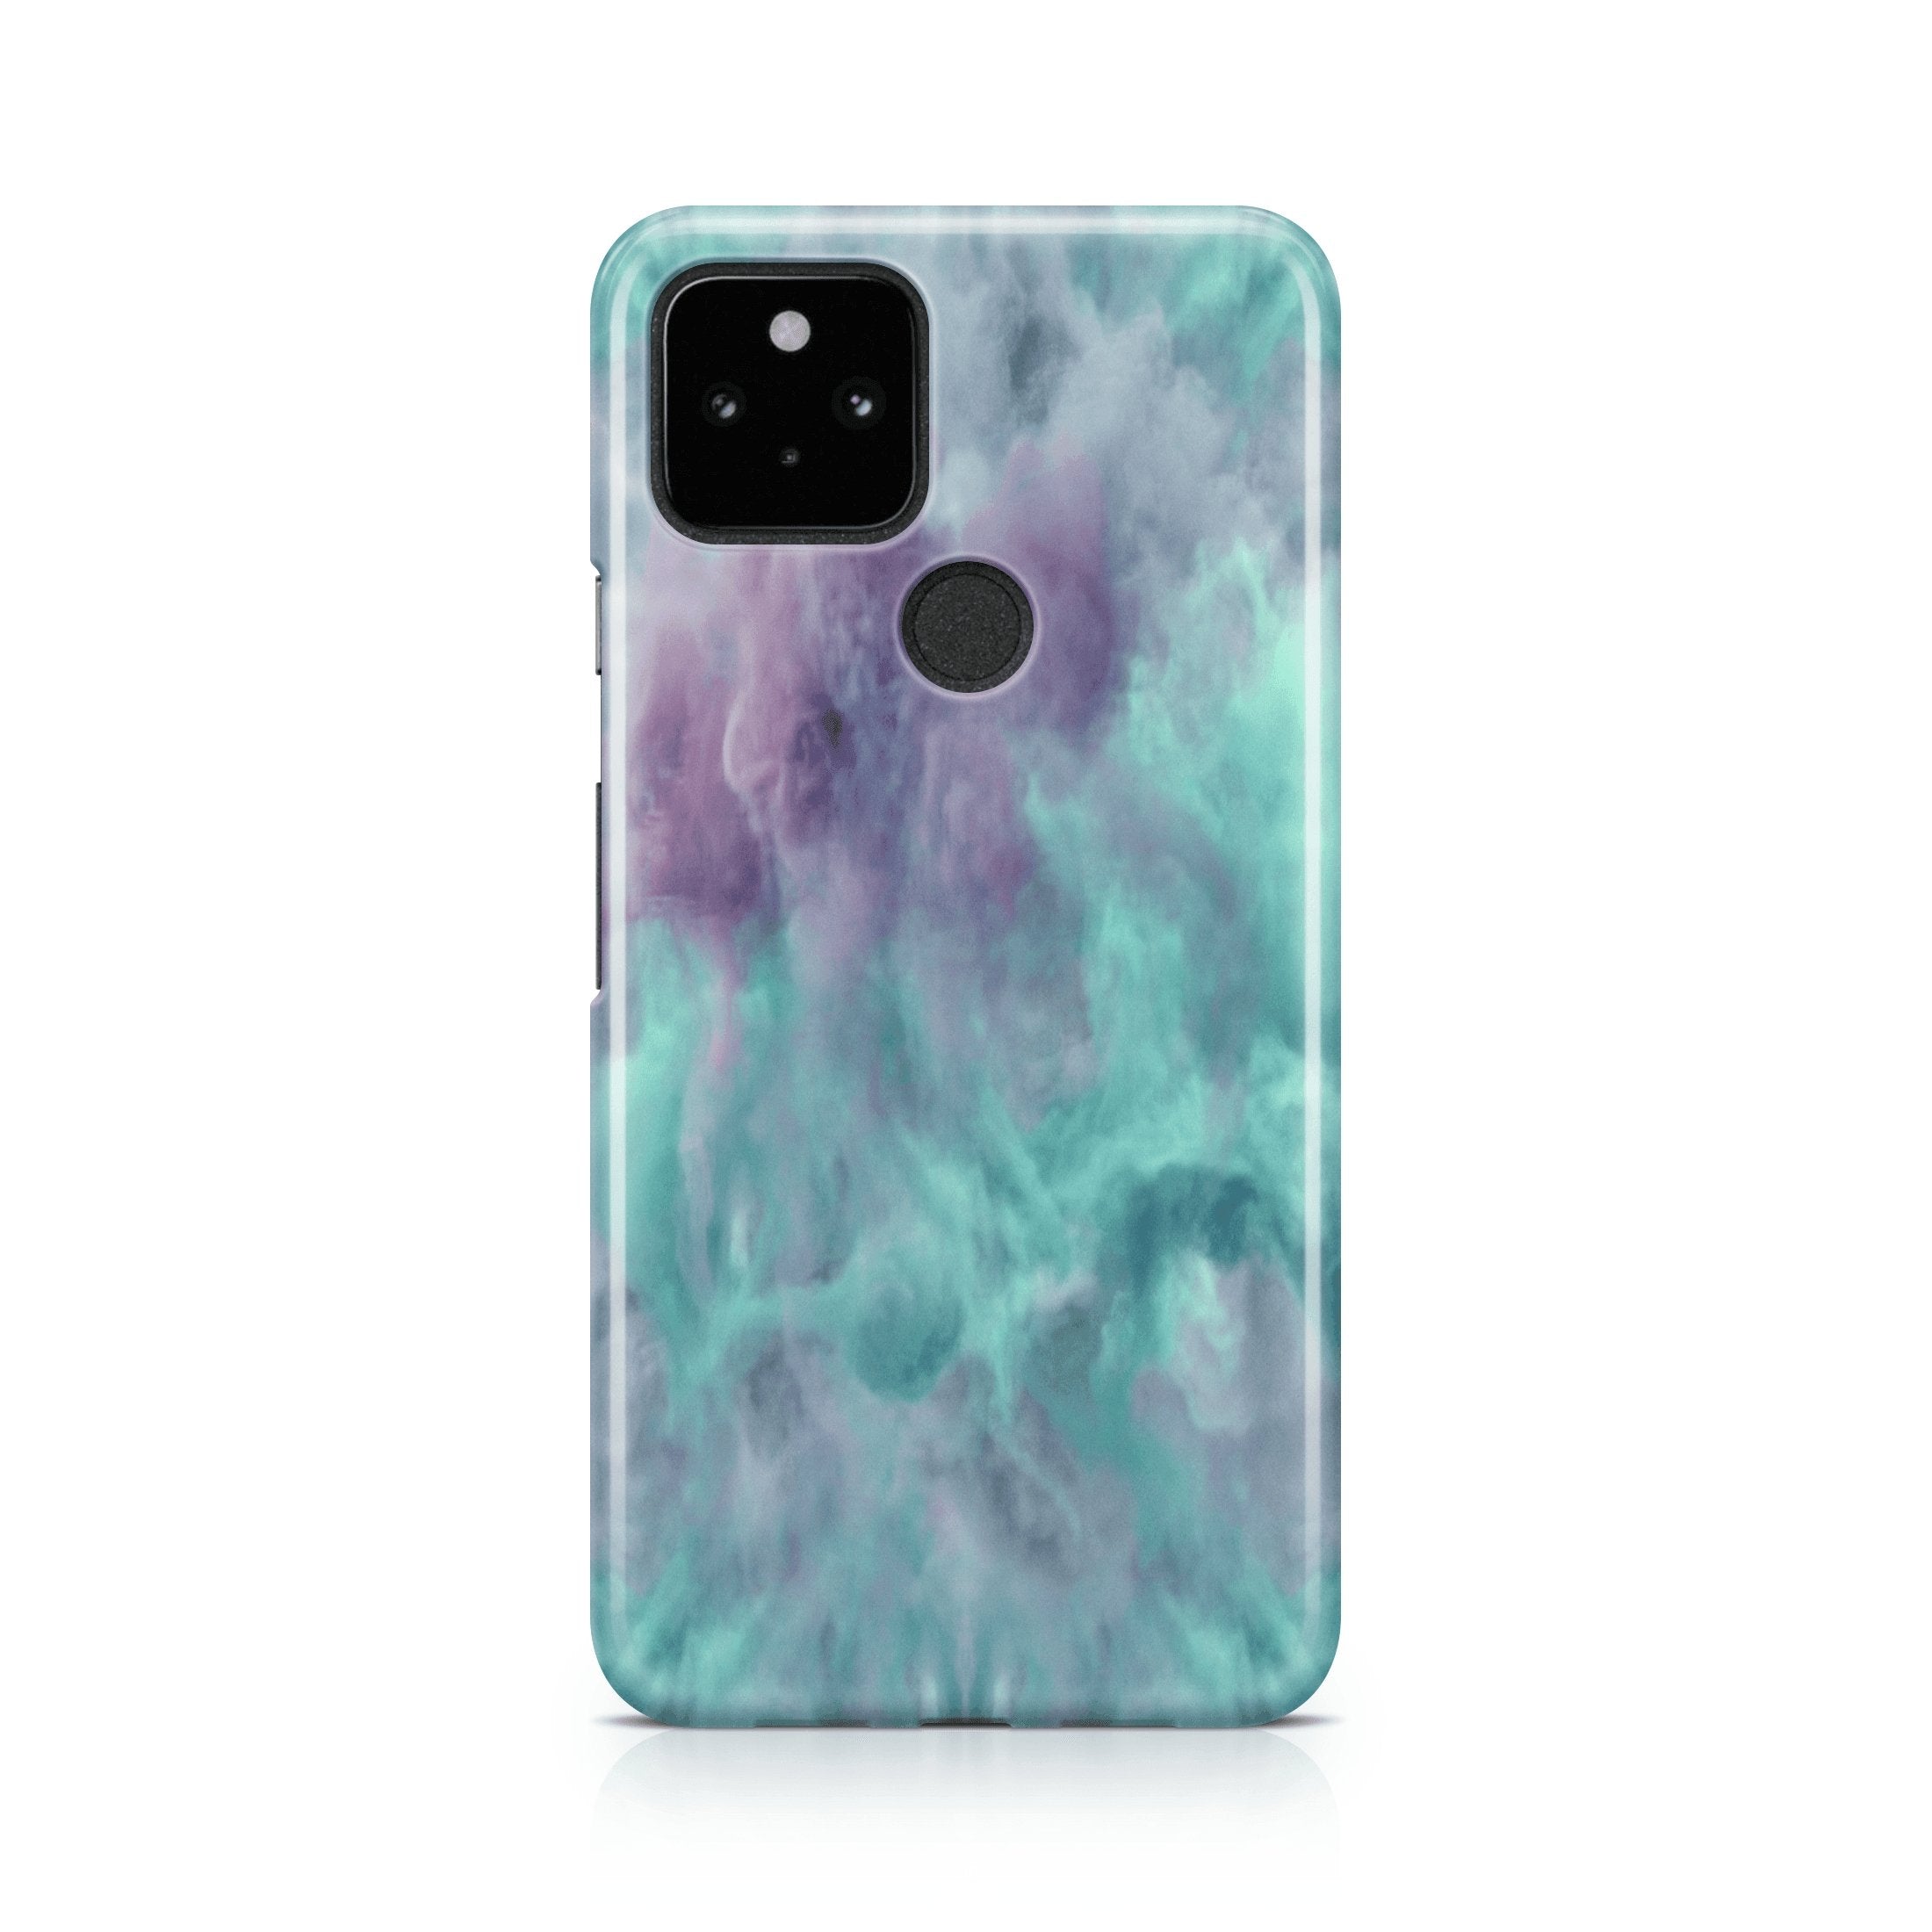 Turquoise Smoke Cloud - Google phone case designs by CaseSwagger